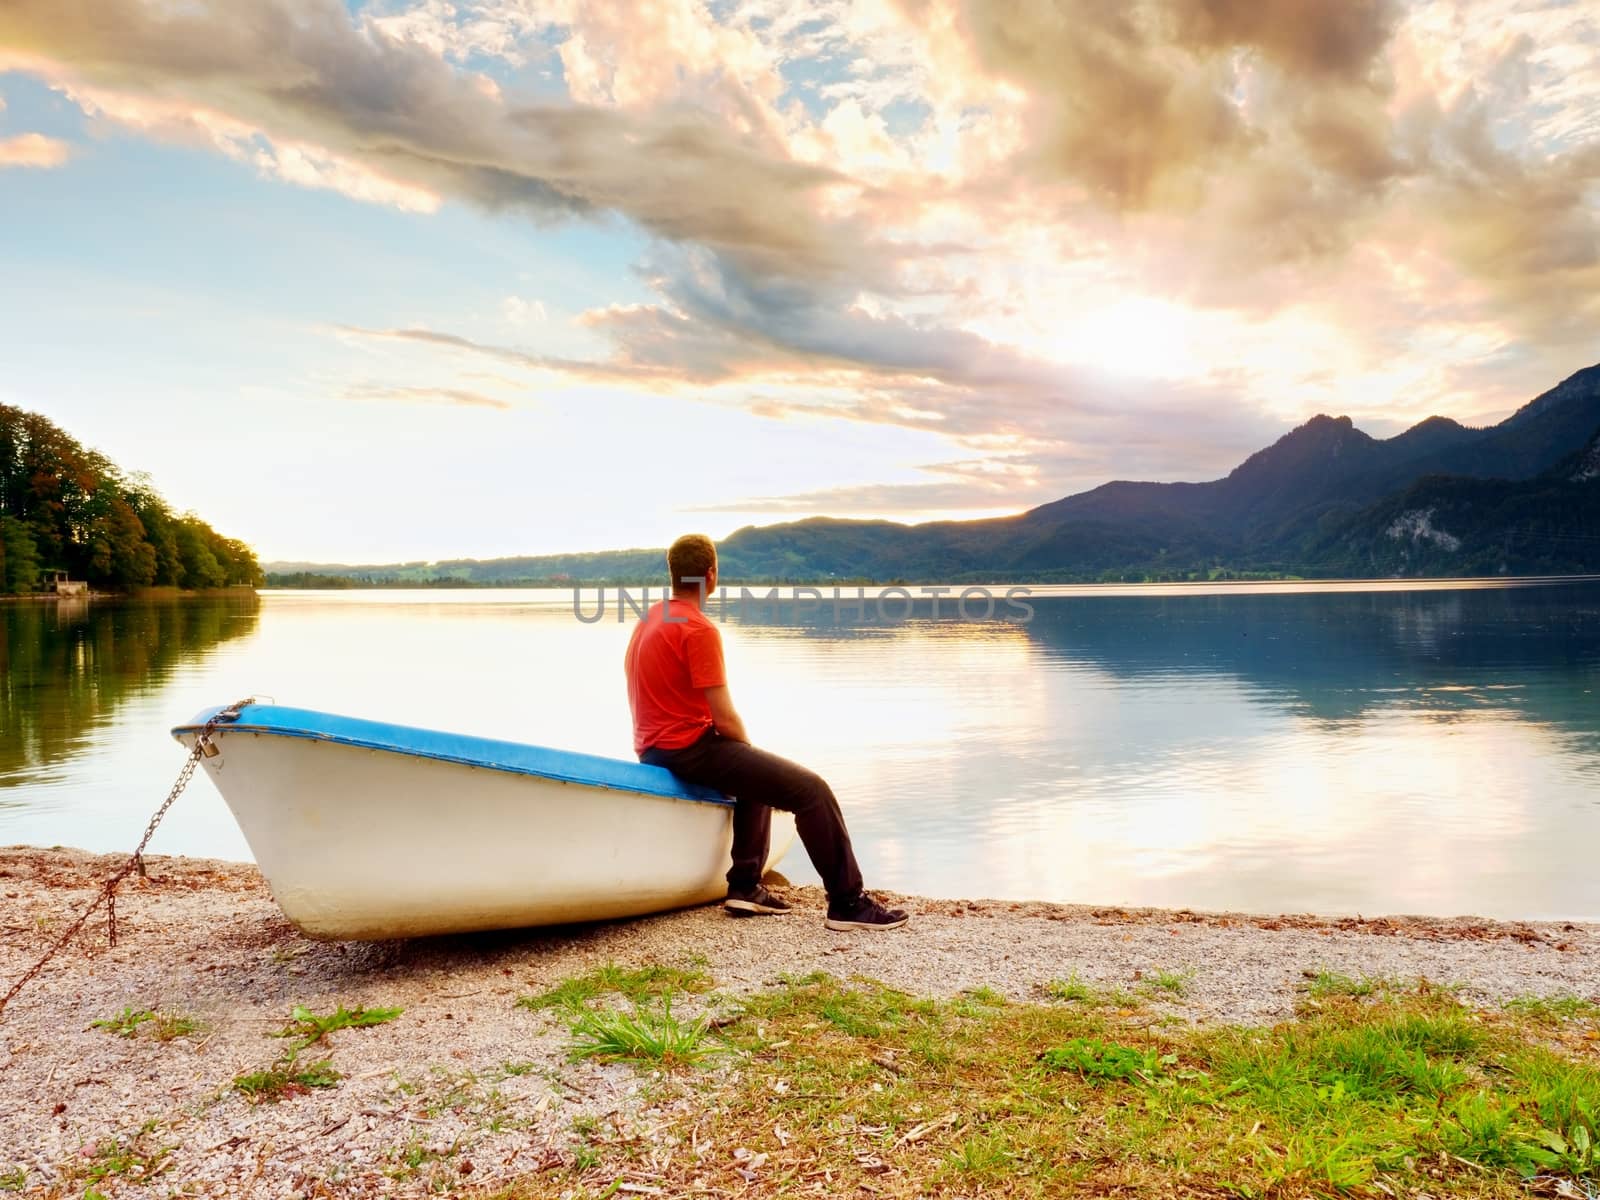 Tiired man in red shirt sit on old fishing paddle boat at mountains lake coast. by rdonar2